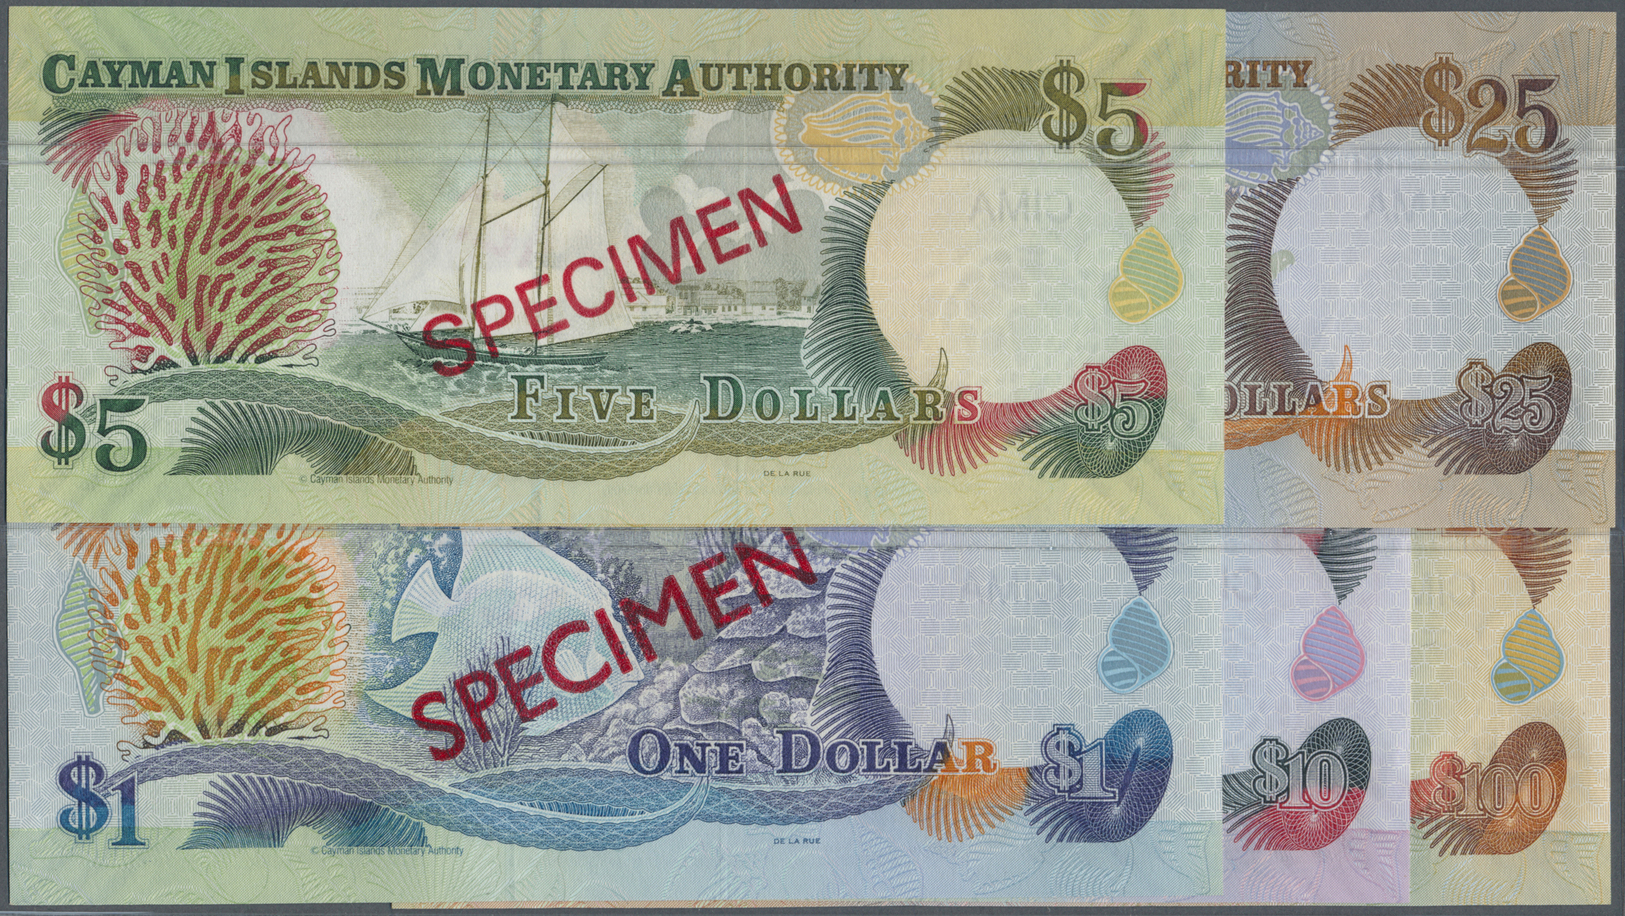 00519 Cayman Islands: Set Of 5 SPECIMEN Notes Containing 1, 5, 10, 25 And 100 Dollars 2004 SPECIMEN P. 33s-37s, All In C - Cayman Islands